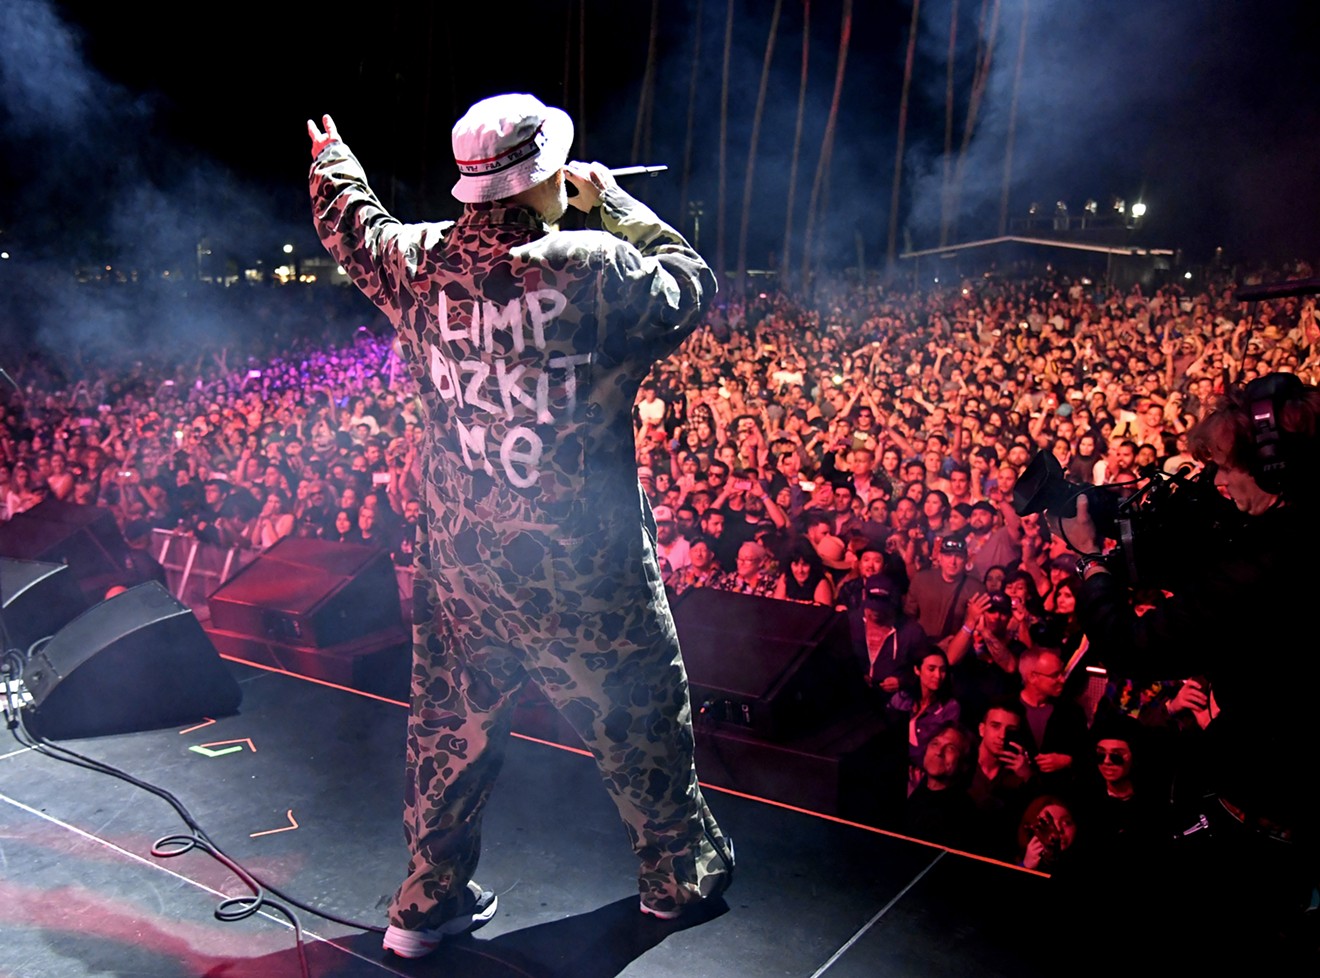 Fred Durst of Limp Bizkit performs onstage at KROQ Weenie Roast & Luau at Doheny State Beach on June 08, 2019 in Dana Point, California.